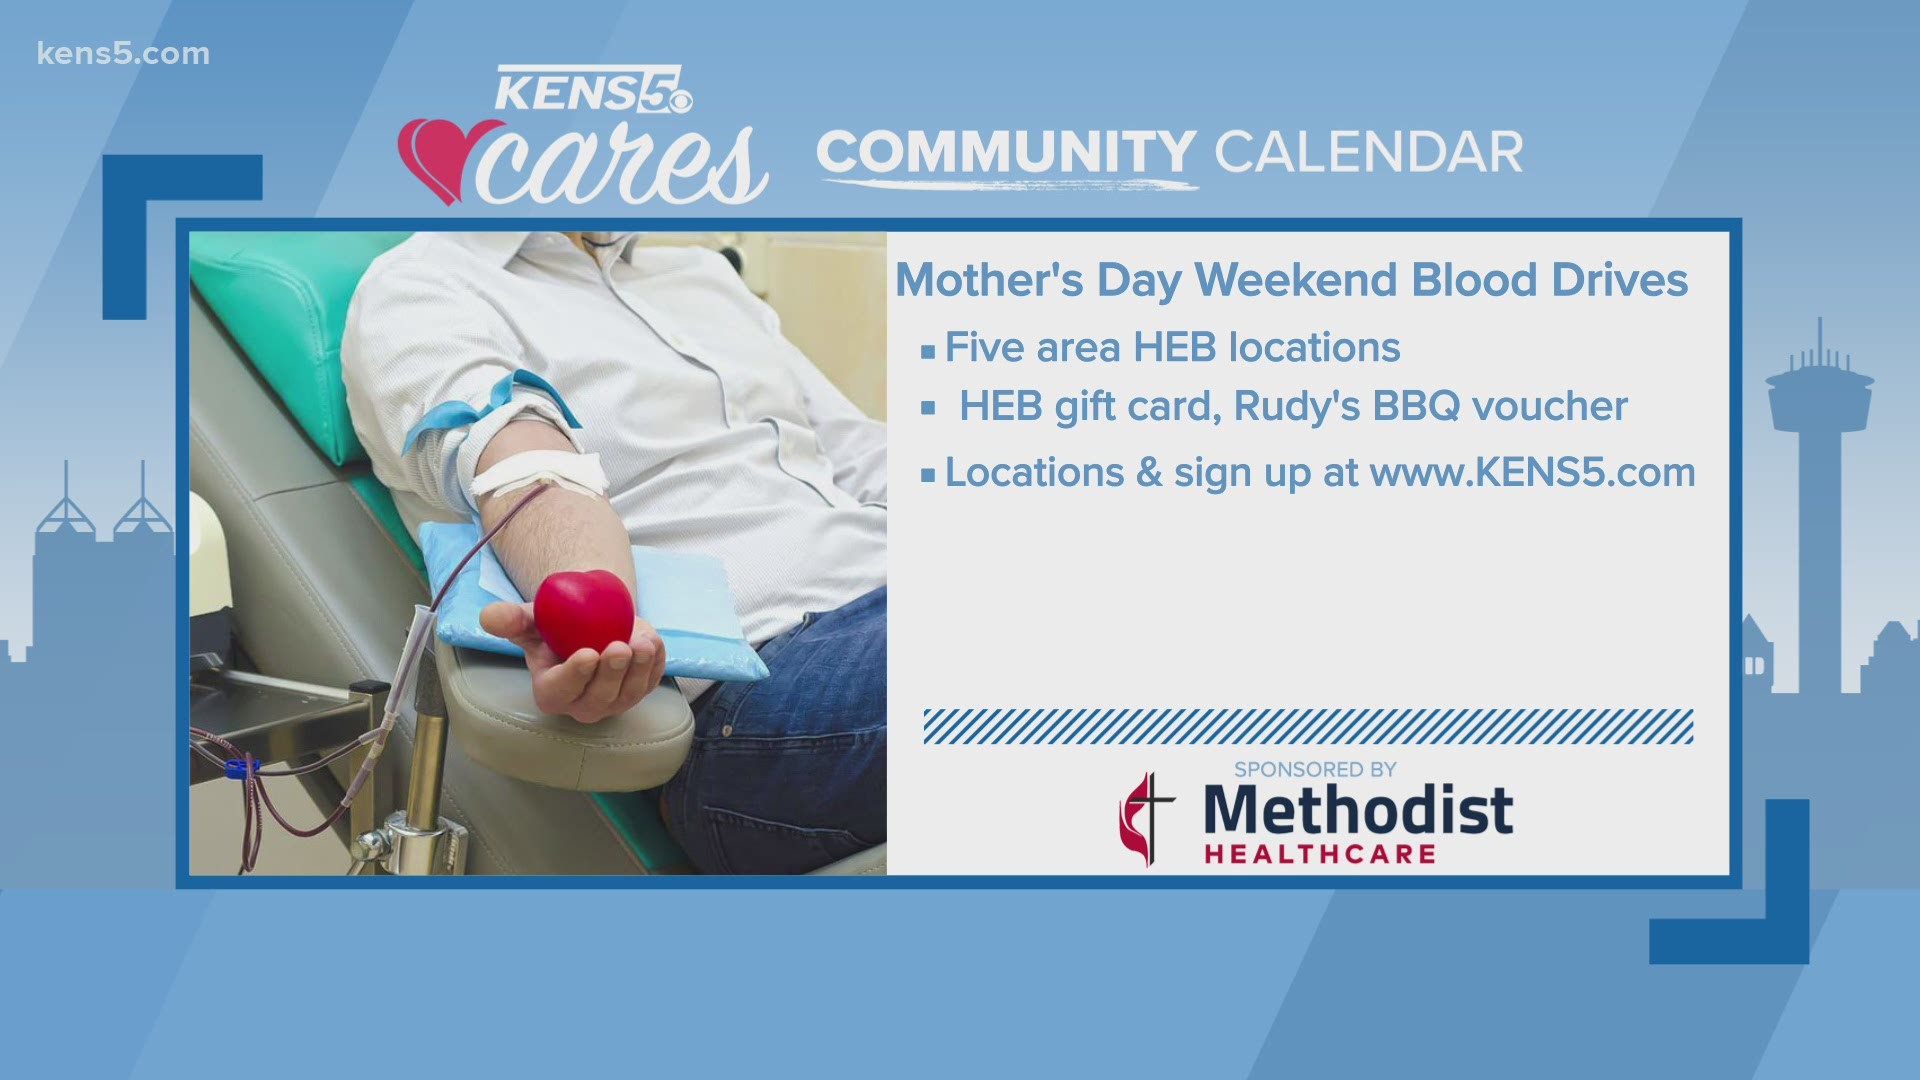 South Texas Blood & Tissue Center is hosting blood drives at select H-E-B locations in San Antonio this Mother’s Day weekend.